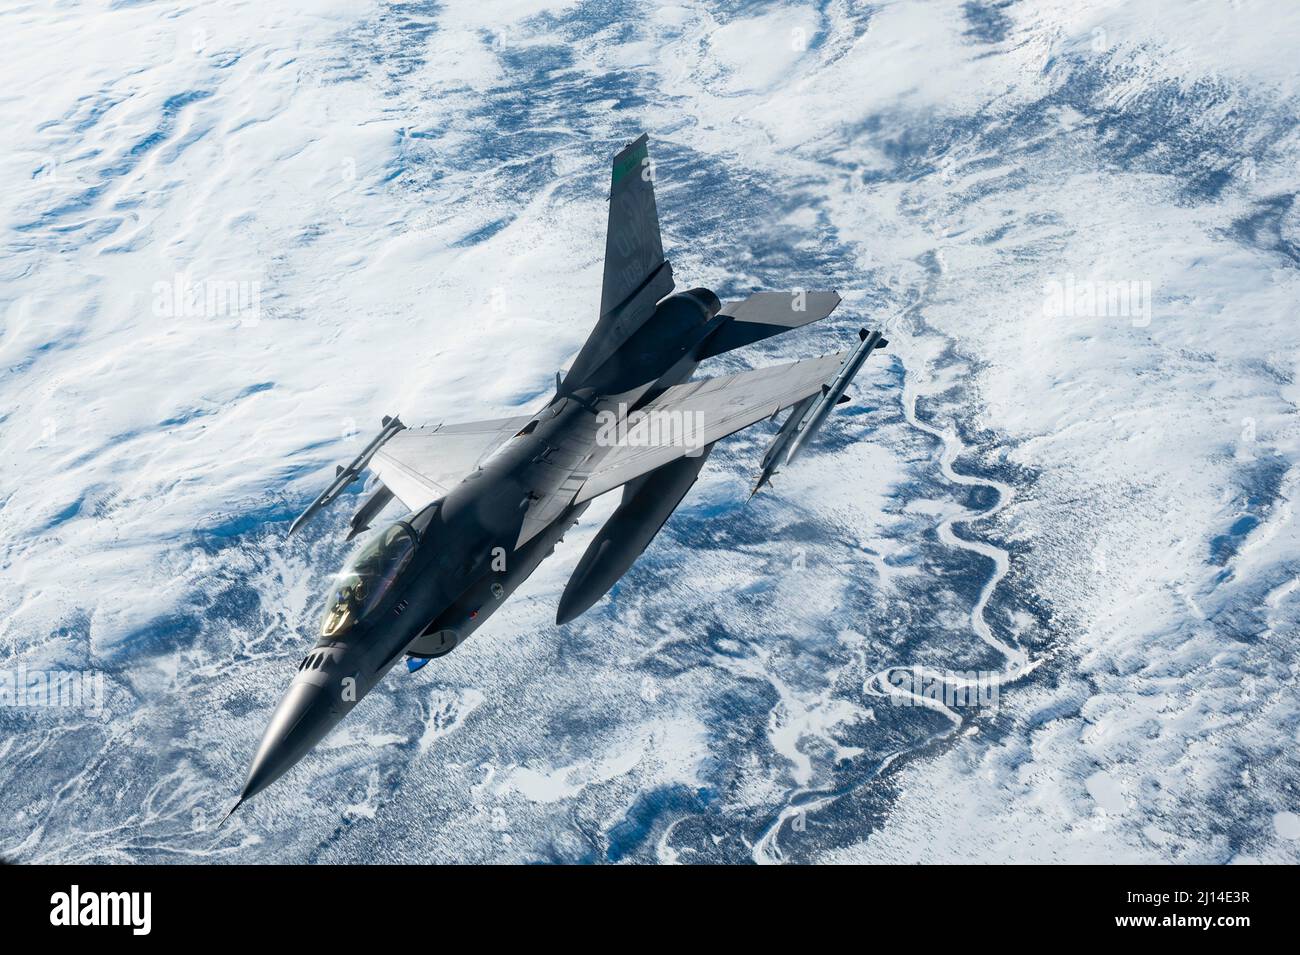 Central Alaska, United States. 16 March, 2022. A U.S. Air Force F-16 Fighting Falcon fighter jet, assigned to 180th Fighter Wing, banks away after refueling from a KC-135R Stratotanker during Operation Arctic Edge, March 16, 2022 over Alaska. The Northern Command Exercise is part of recent military moves to deter Russian involvement in Ukraine.  Credit: SSgt. Taylor Crul/U.S. Air Force/Alamy Live News Stock Photo